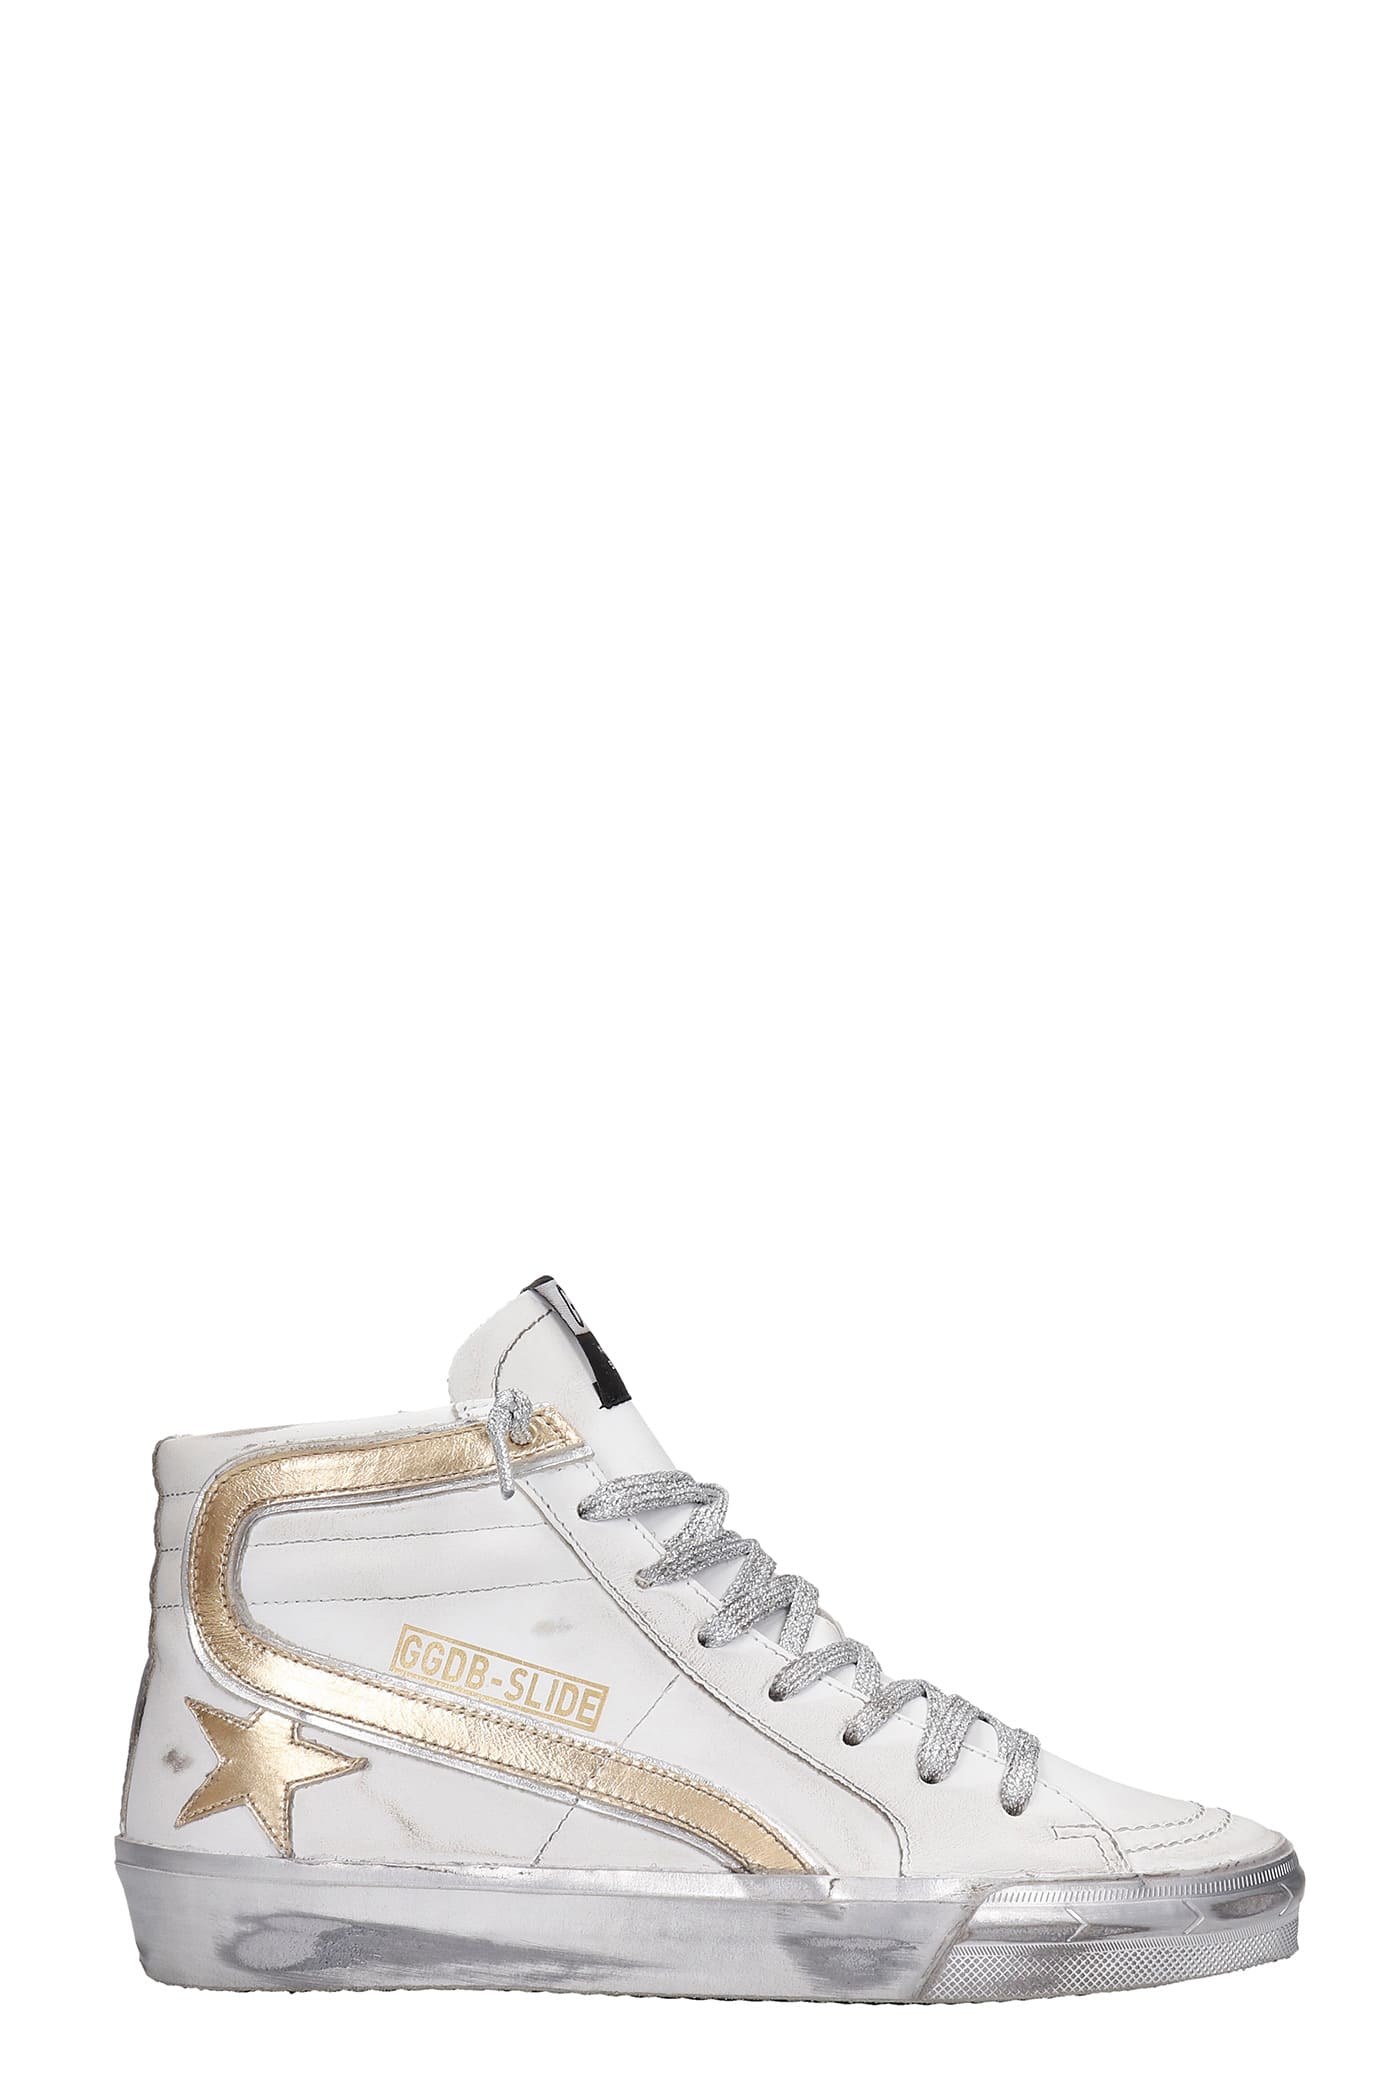 Golden Goose Slide Sneakers In White Leather